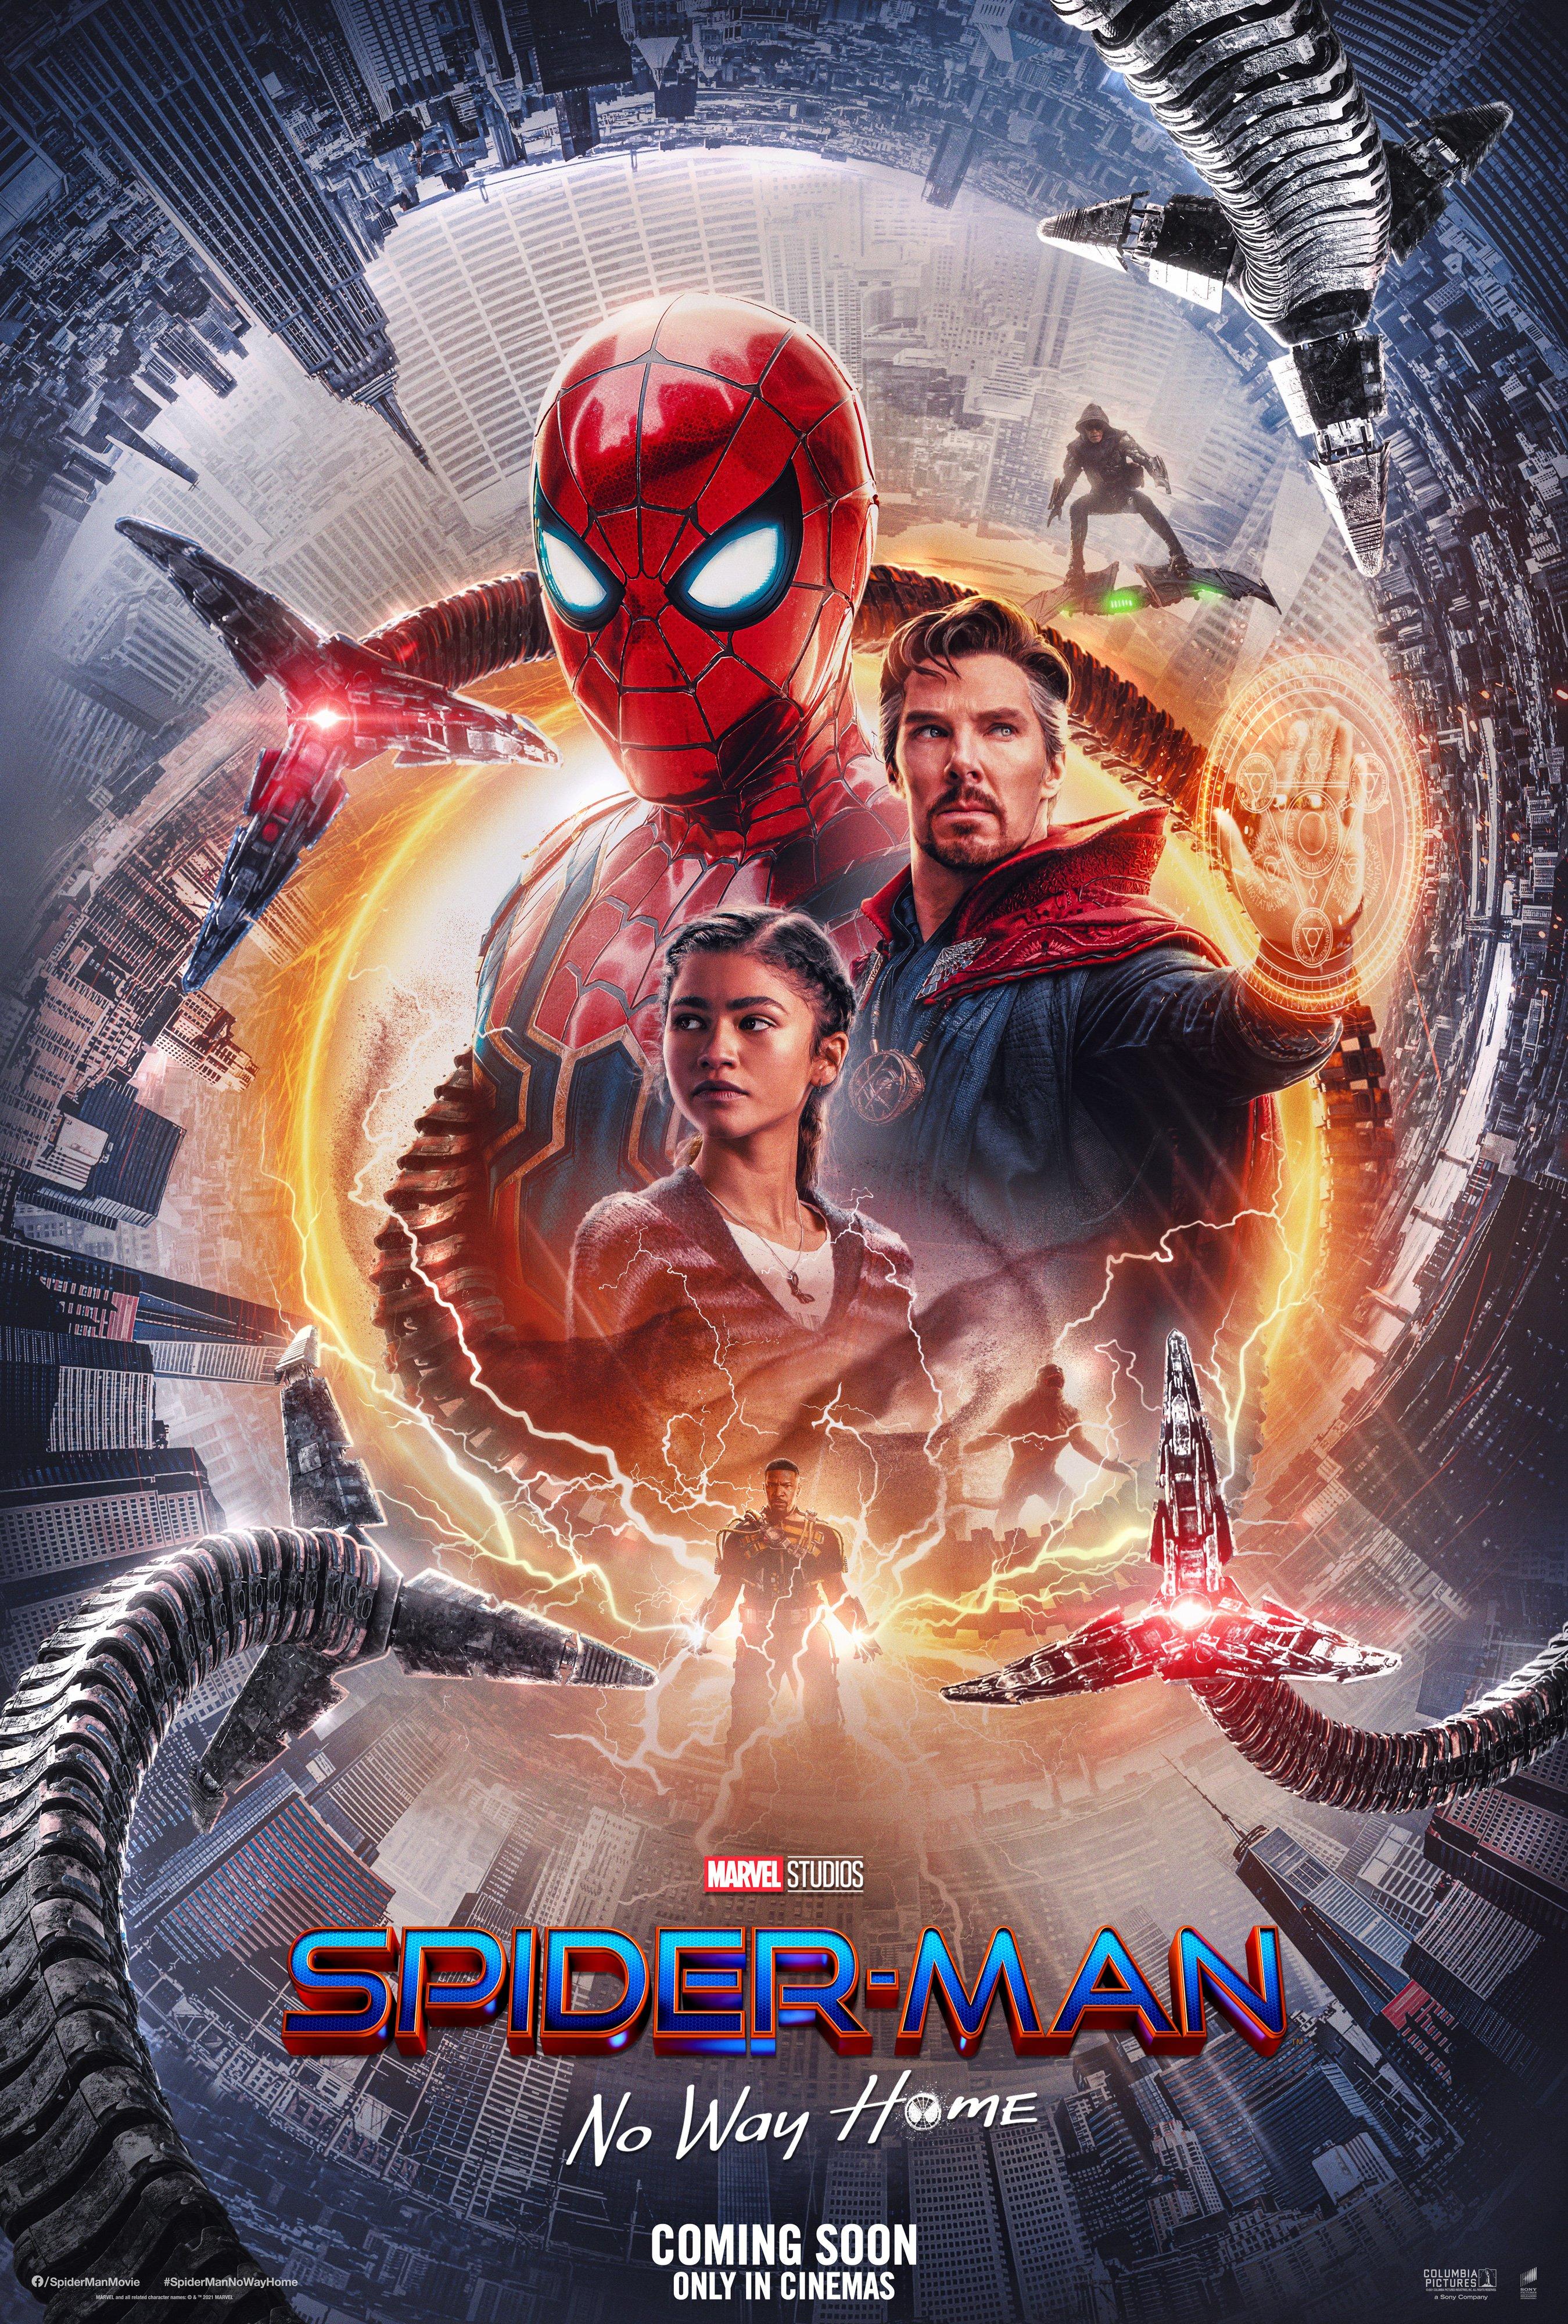 The film delves into the aftermath of Spider-Man's identity being exposed to the world. This revelation forces him to confront the challenges of balancing his personal life with his heroic responsibilities.